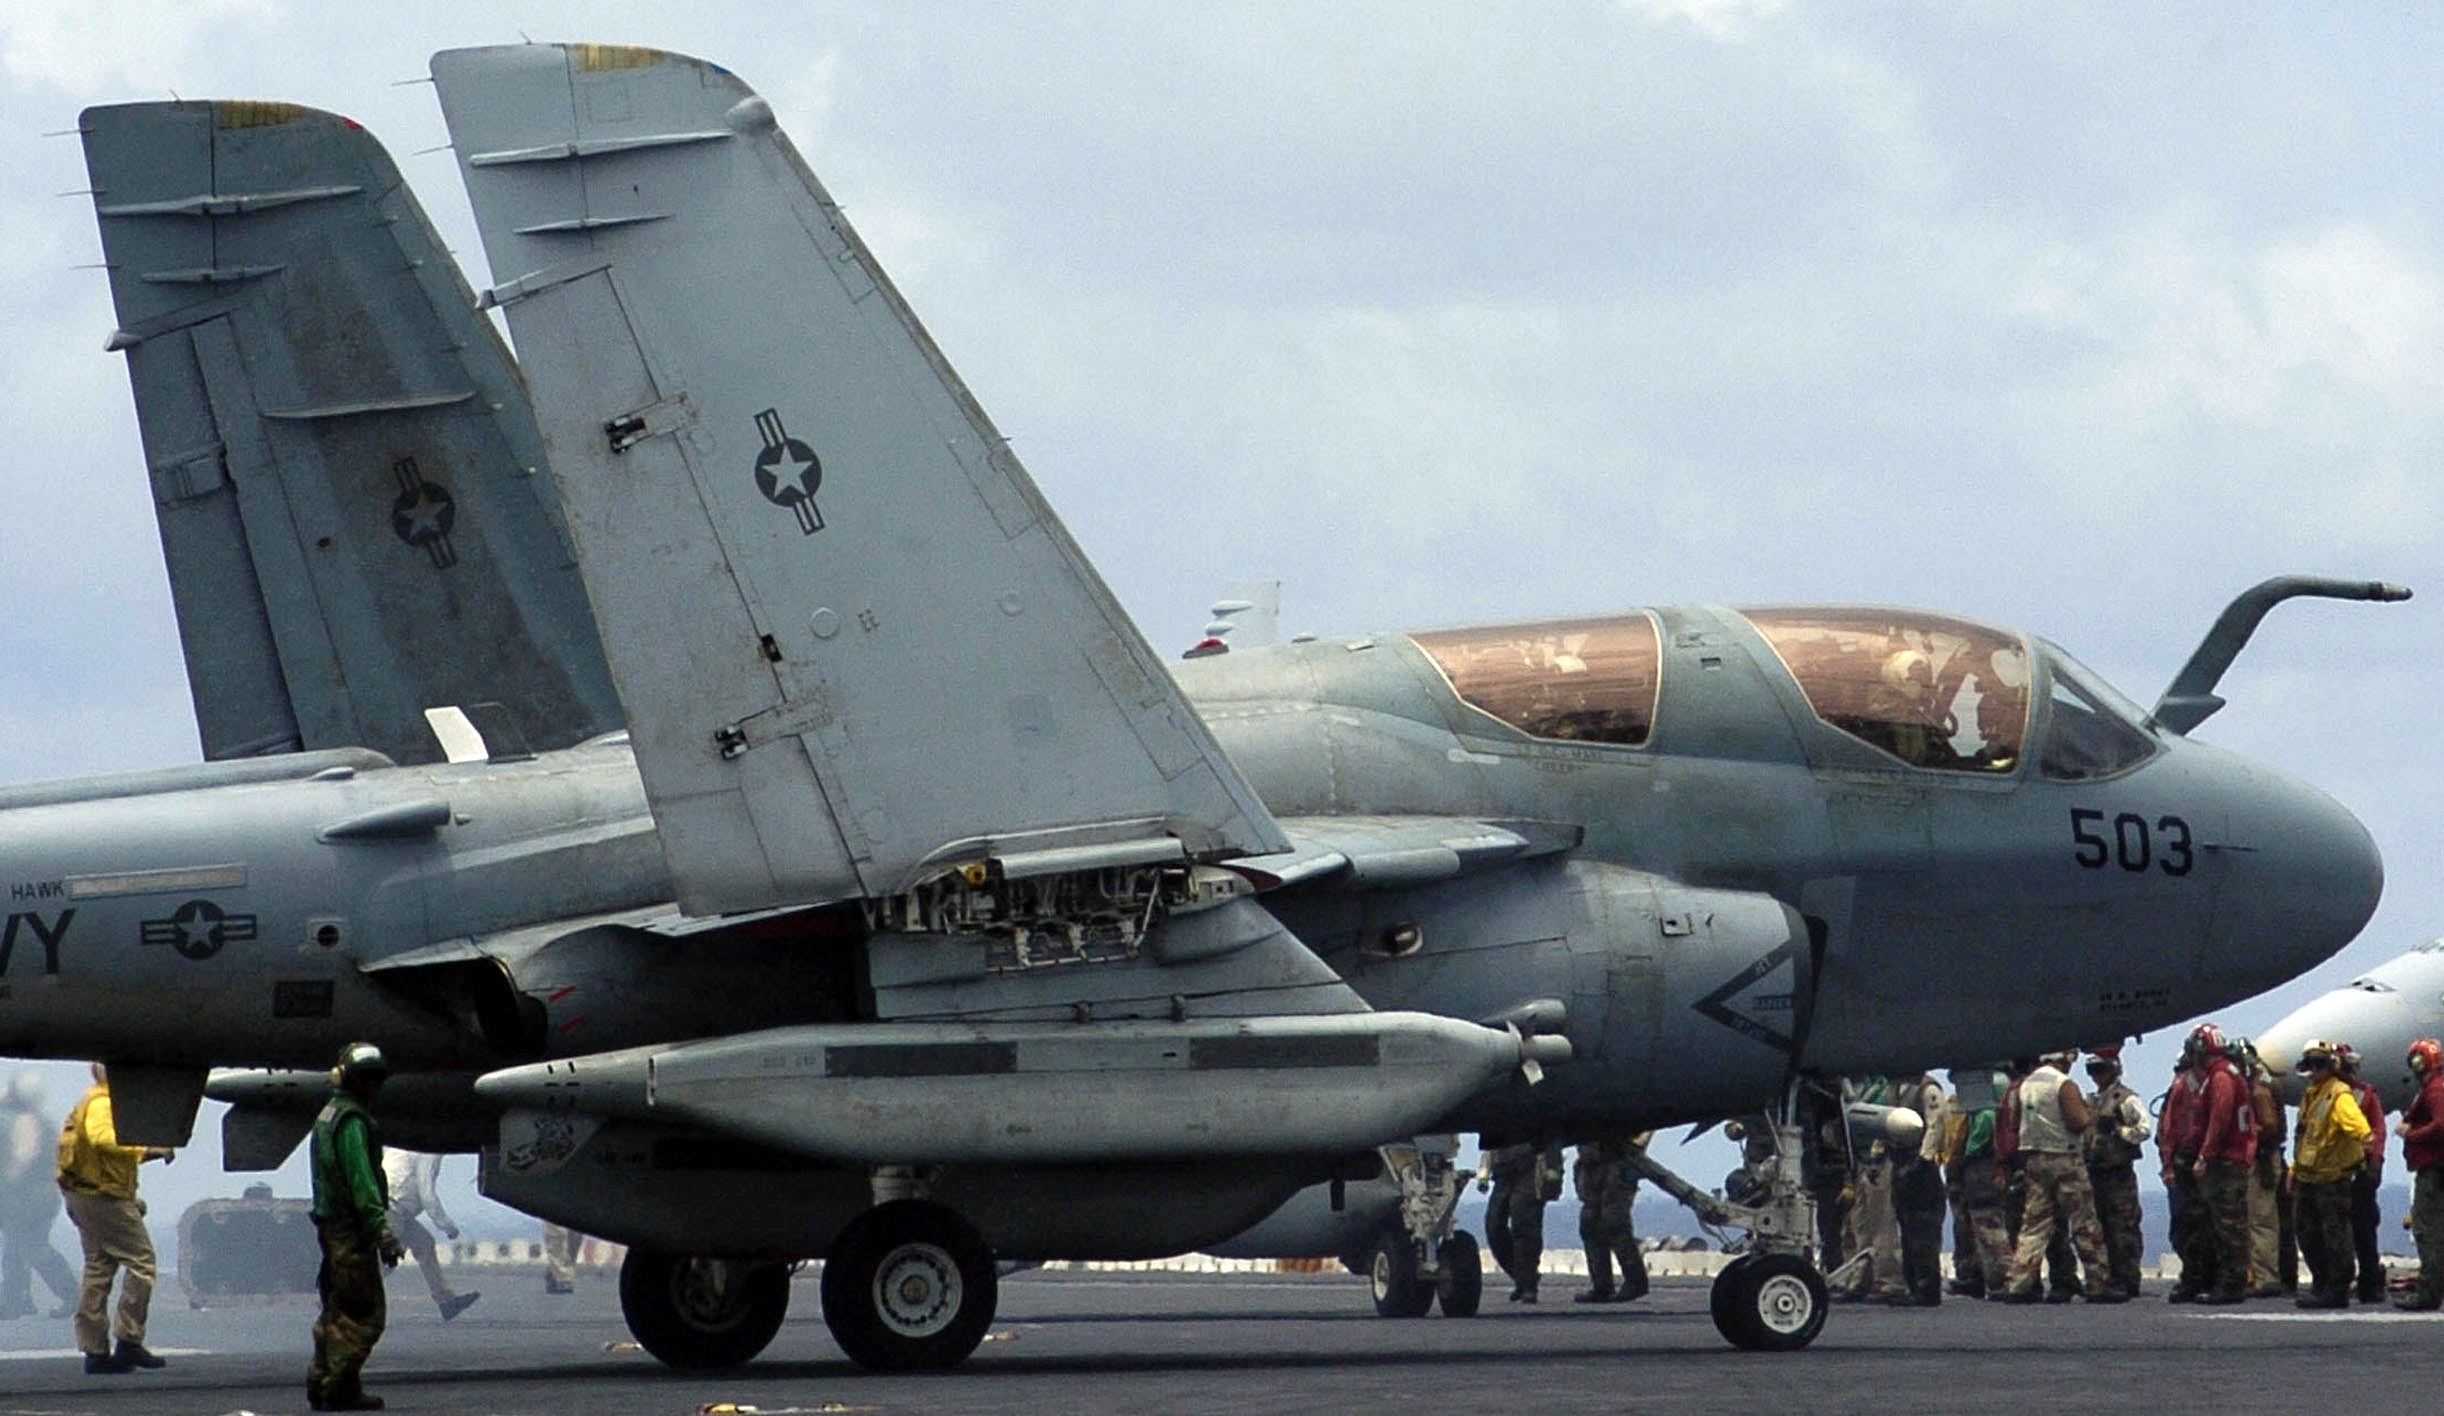 vaq-136 gauntlets electronic attack squadron vaqron us navy ea-6b prowler carrier air wing cvw-5 uss kitty hawk cv-63 51